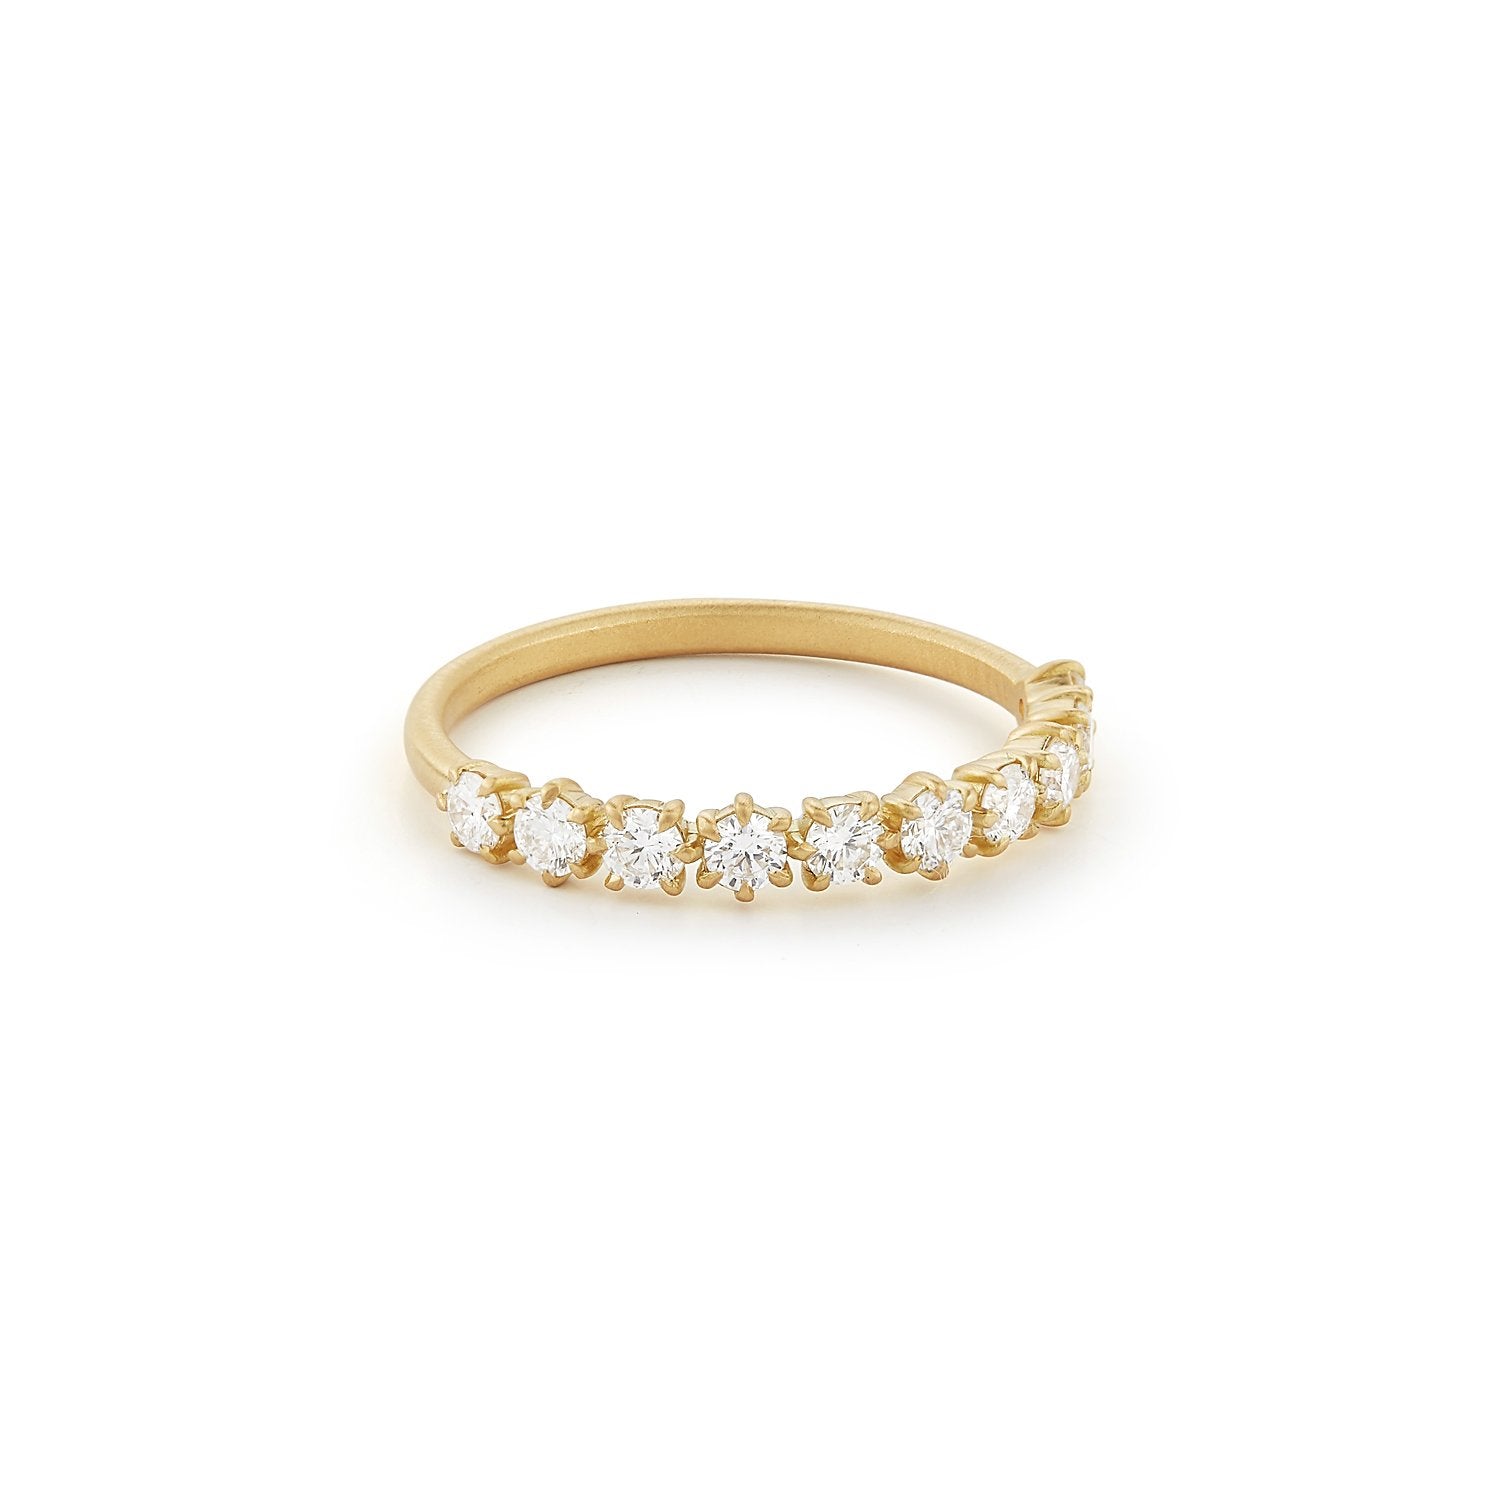 Catherine 1/2 Way Eternity No. 1 in 18K Yellow Gold